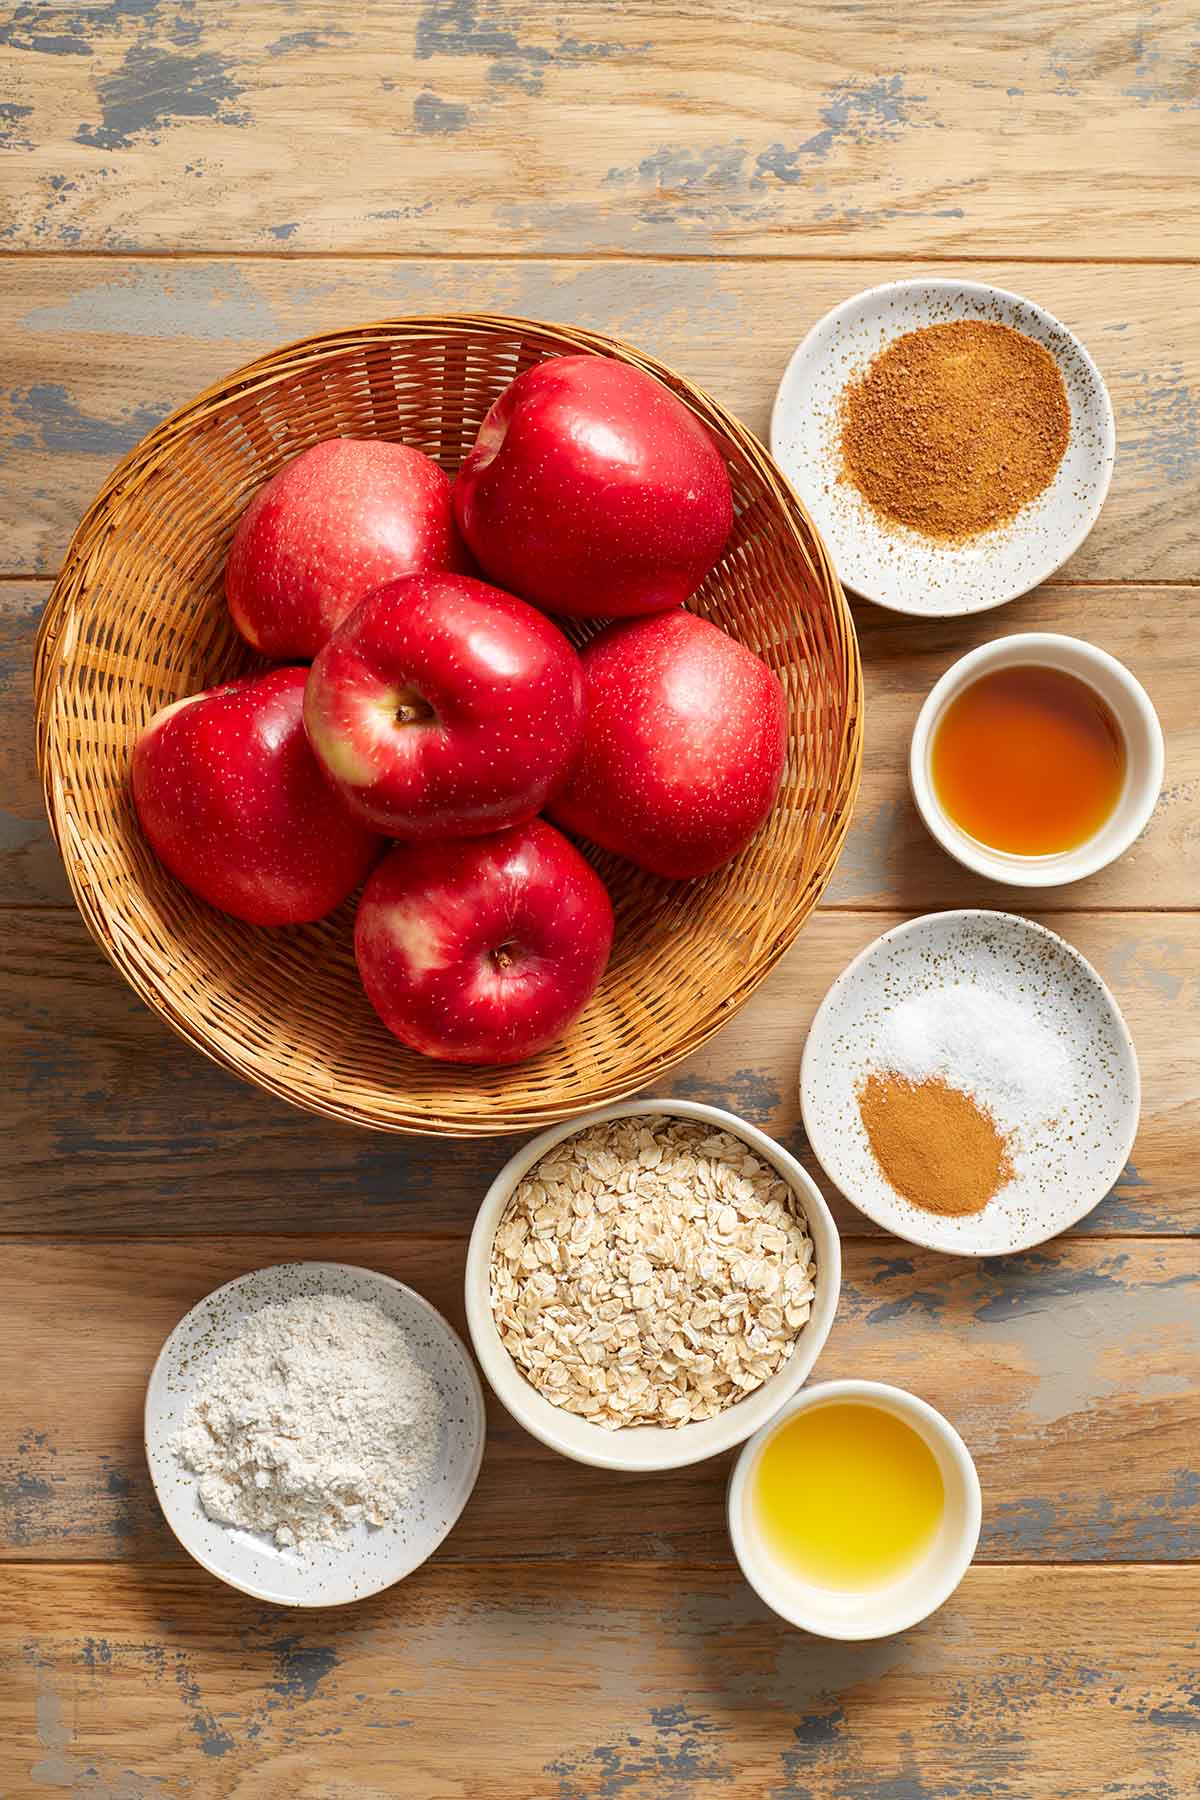 Ingredients to make air fryer apples arranged individually on a wooden surface.